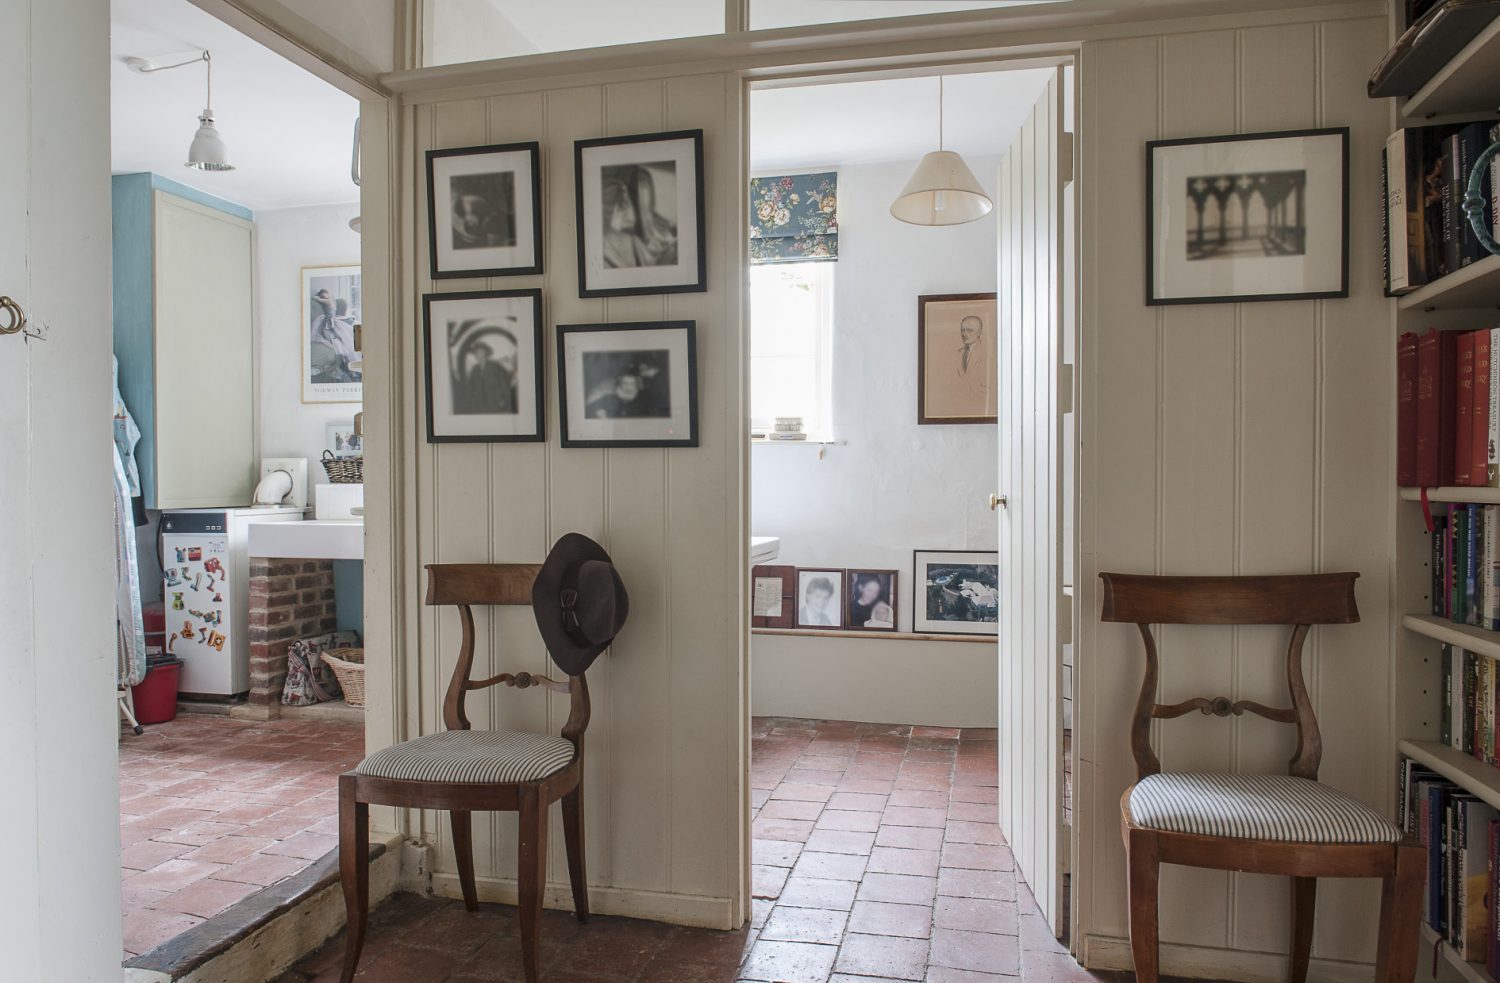 A door leads off the hallway into the downstairs loo and utility room. In most houses, the utility room is an afterthought, if a thought at all, but Francesca’s is a little haven. “I seem to spend so much time in here, I wanted it to be a pleasant space to work in,” she says